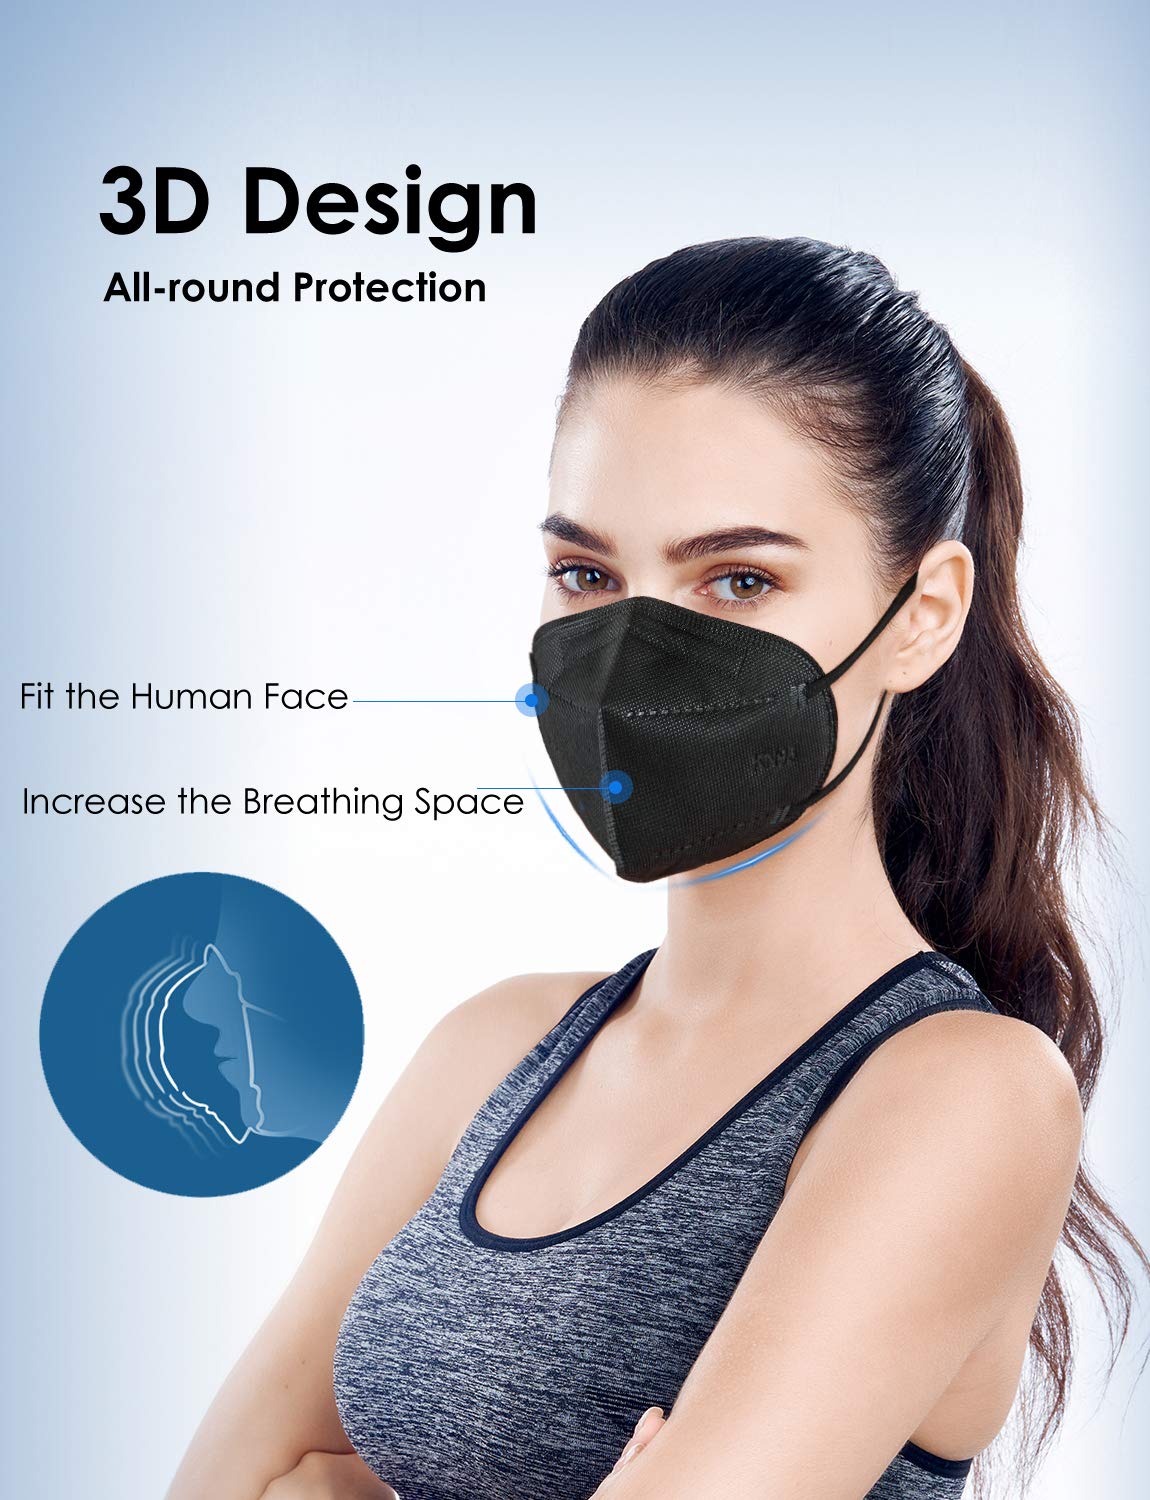 HUHETA KN95 Face Mask 10 Pack, 5-Ply Safety Mask, Filter Efficiency Over 95%, Against PM2.5 (Black Mask)